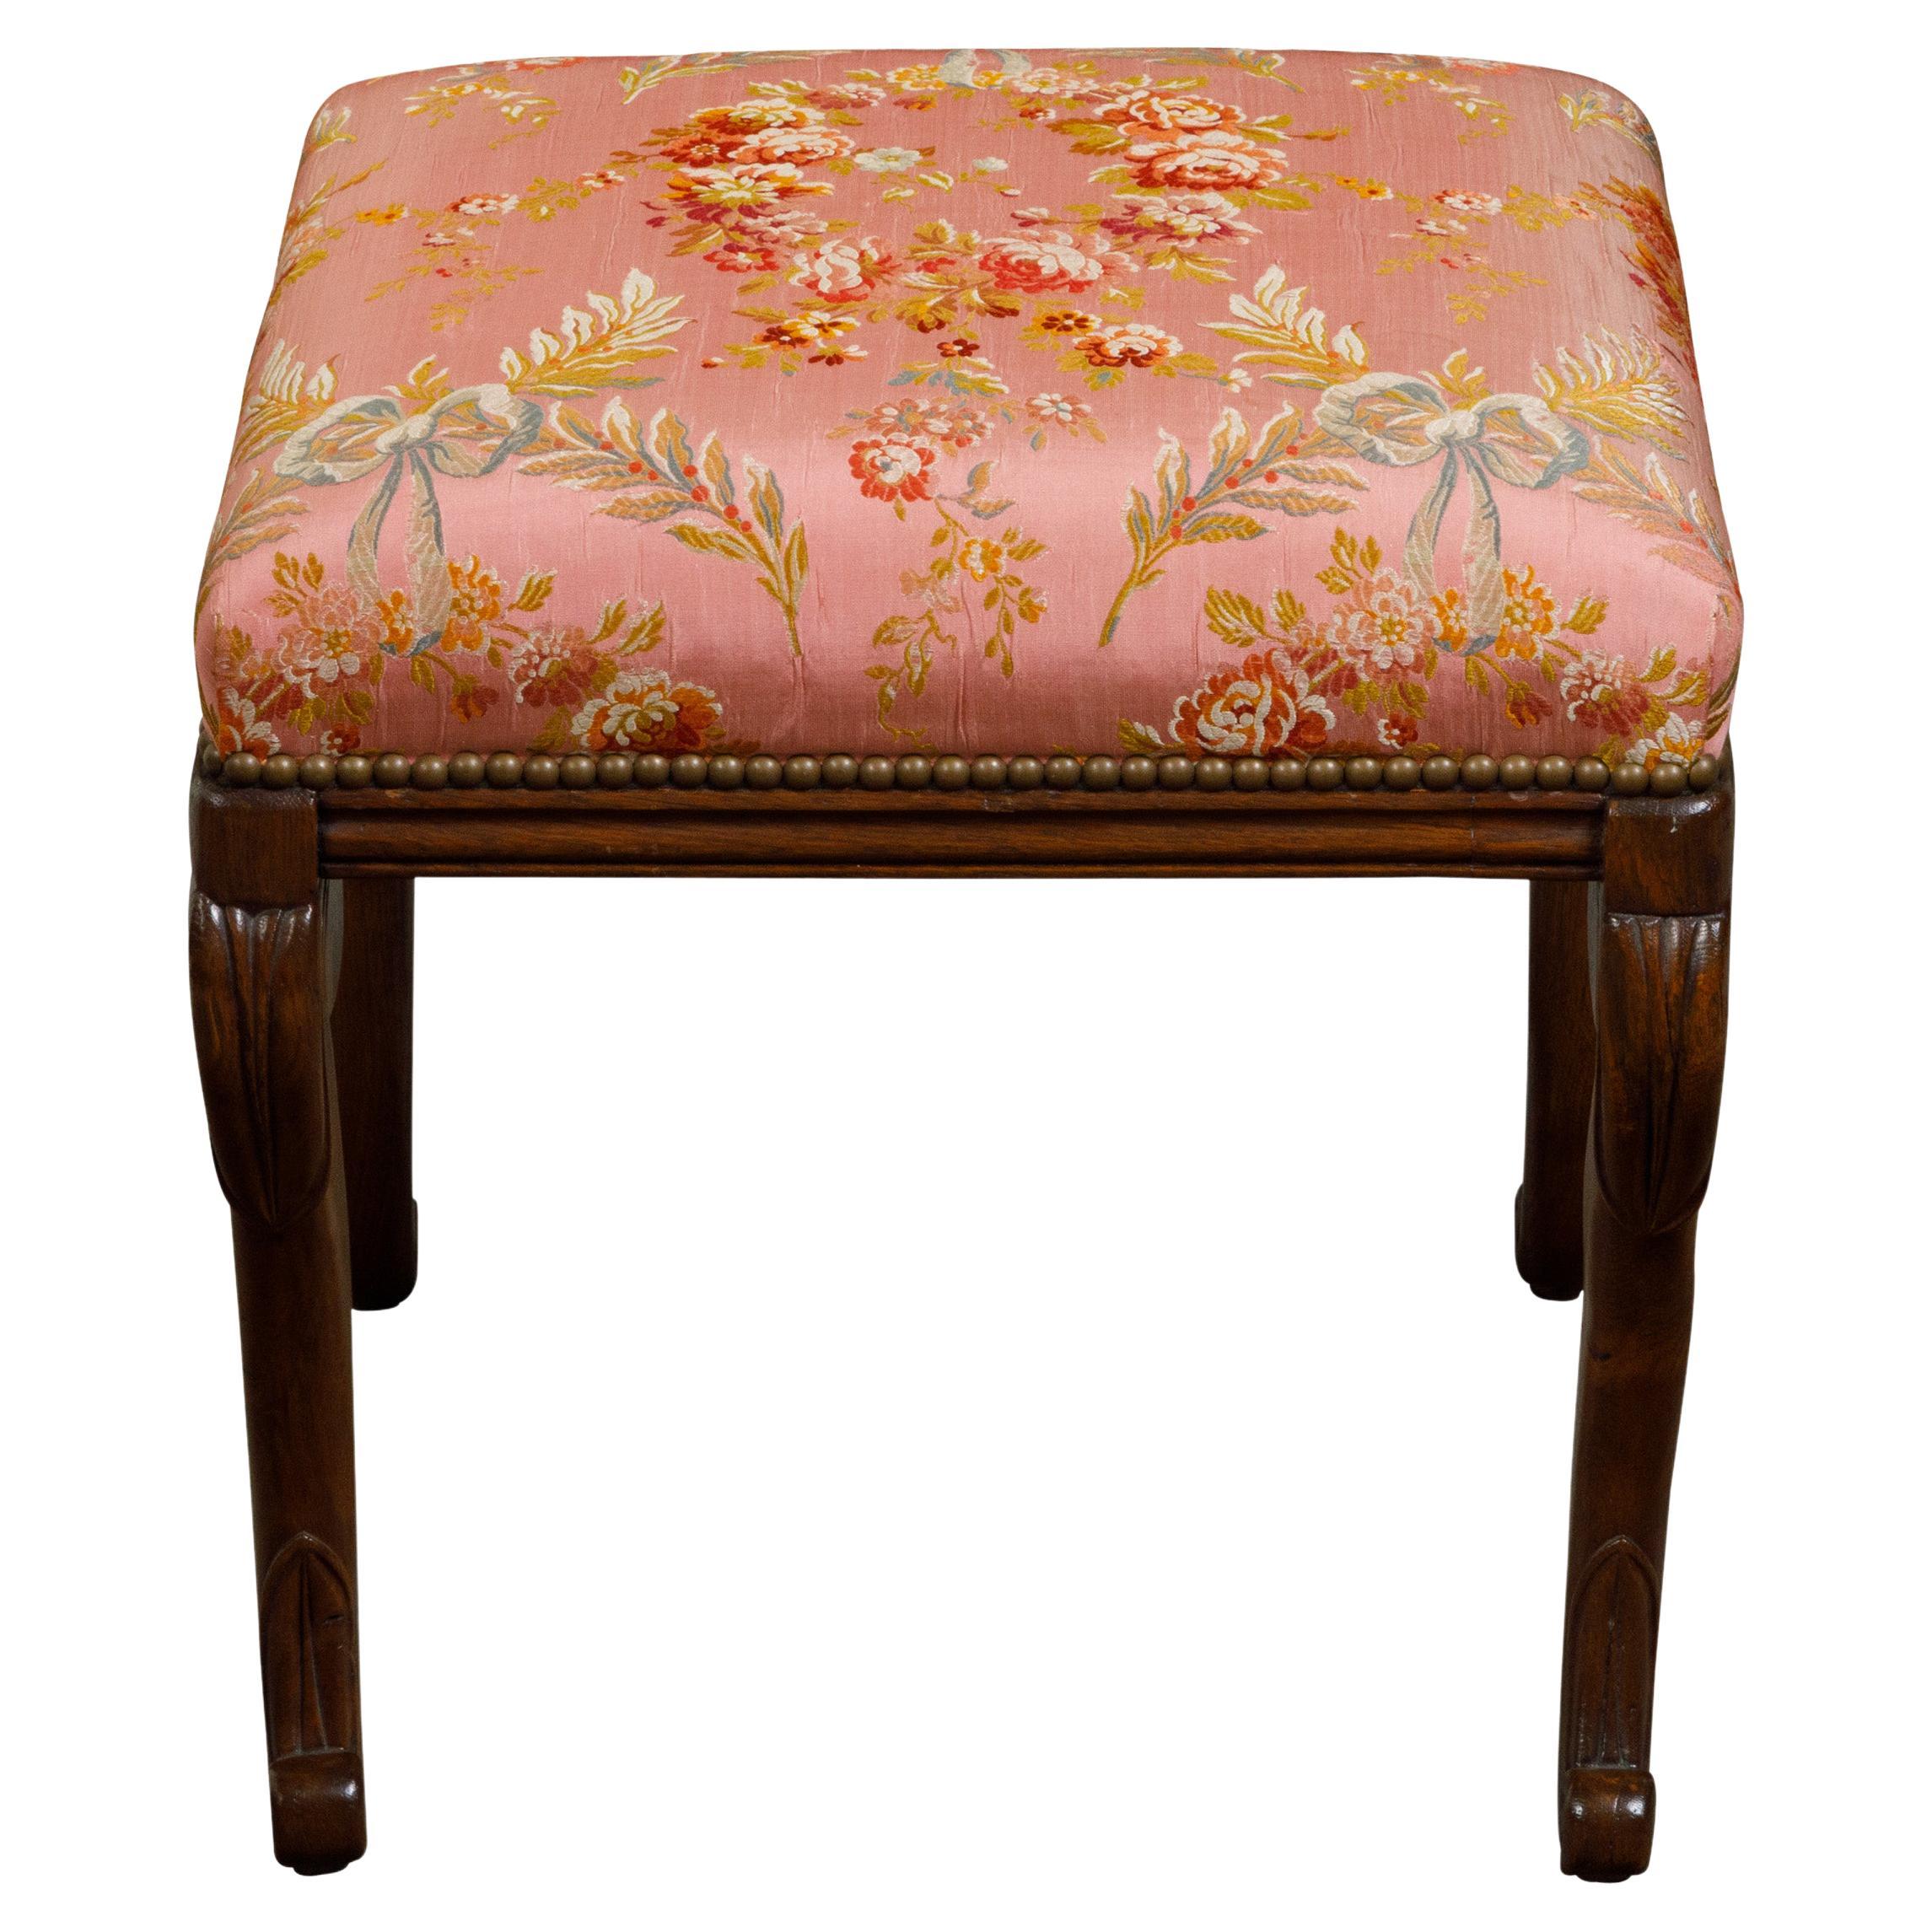 English 1820s Mahogany Stool with Floral Themed Upholstery and Cabriole Legs